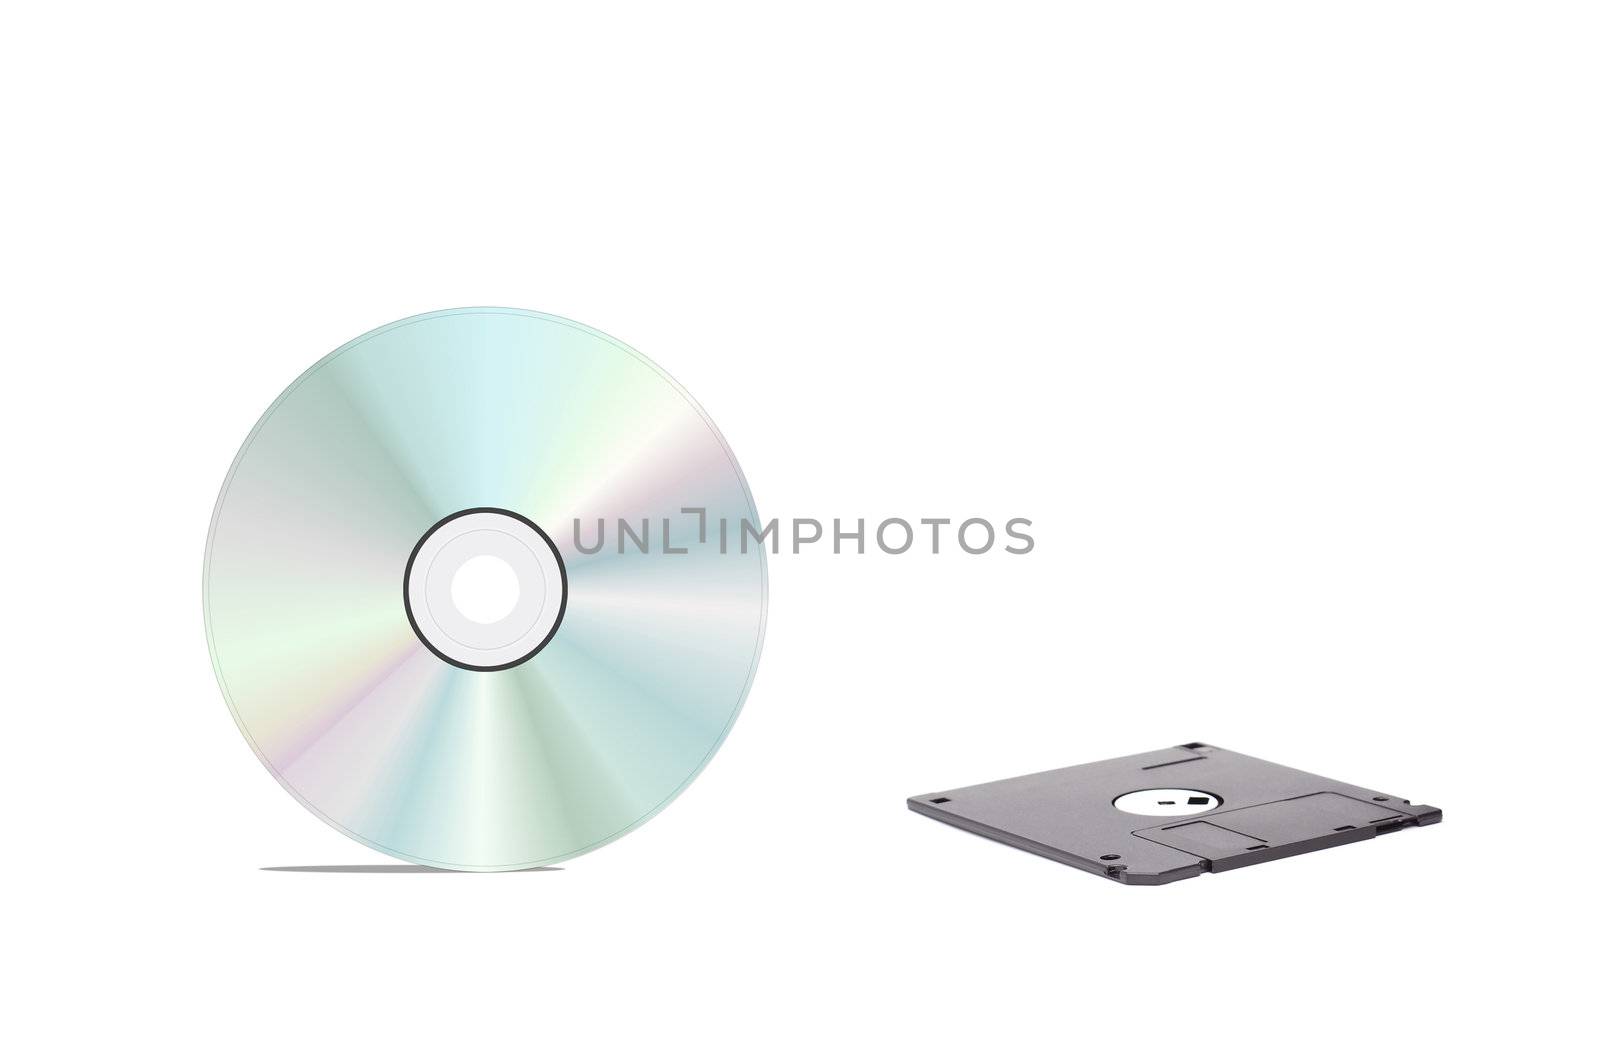 floppy disk and cd by ozaiachin